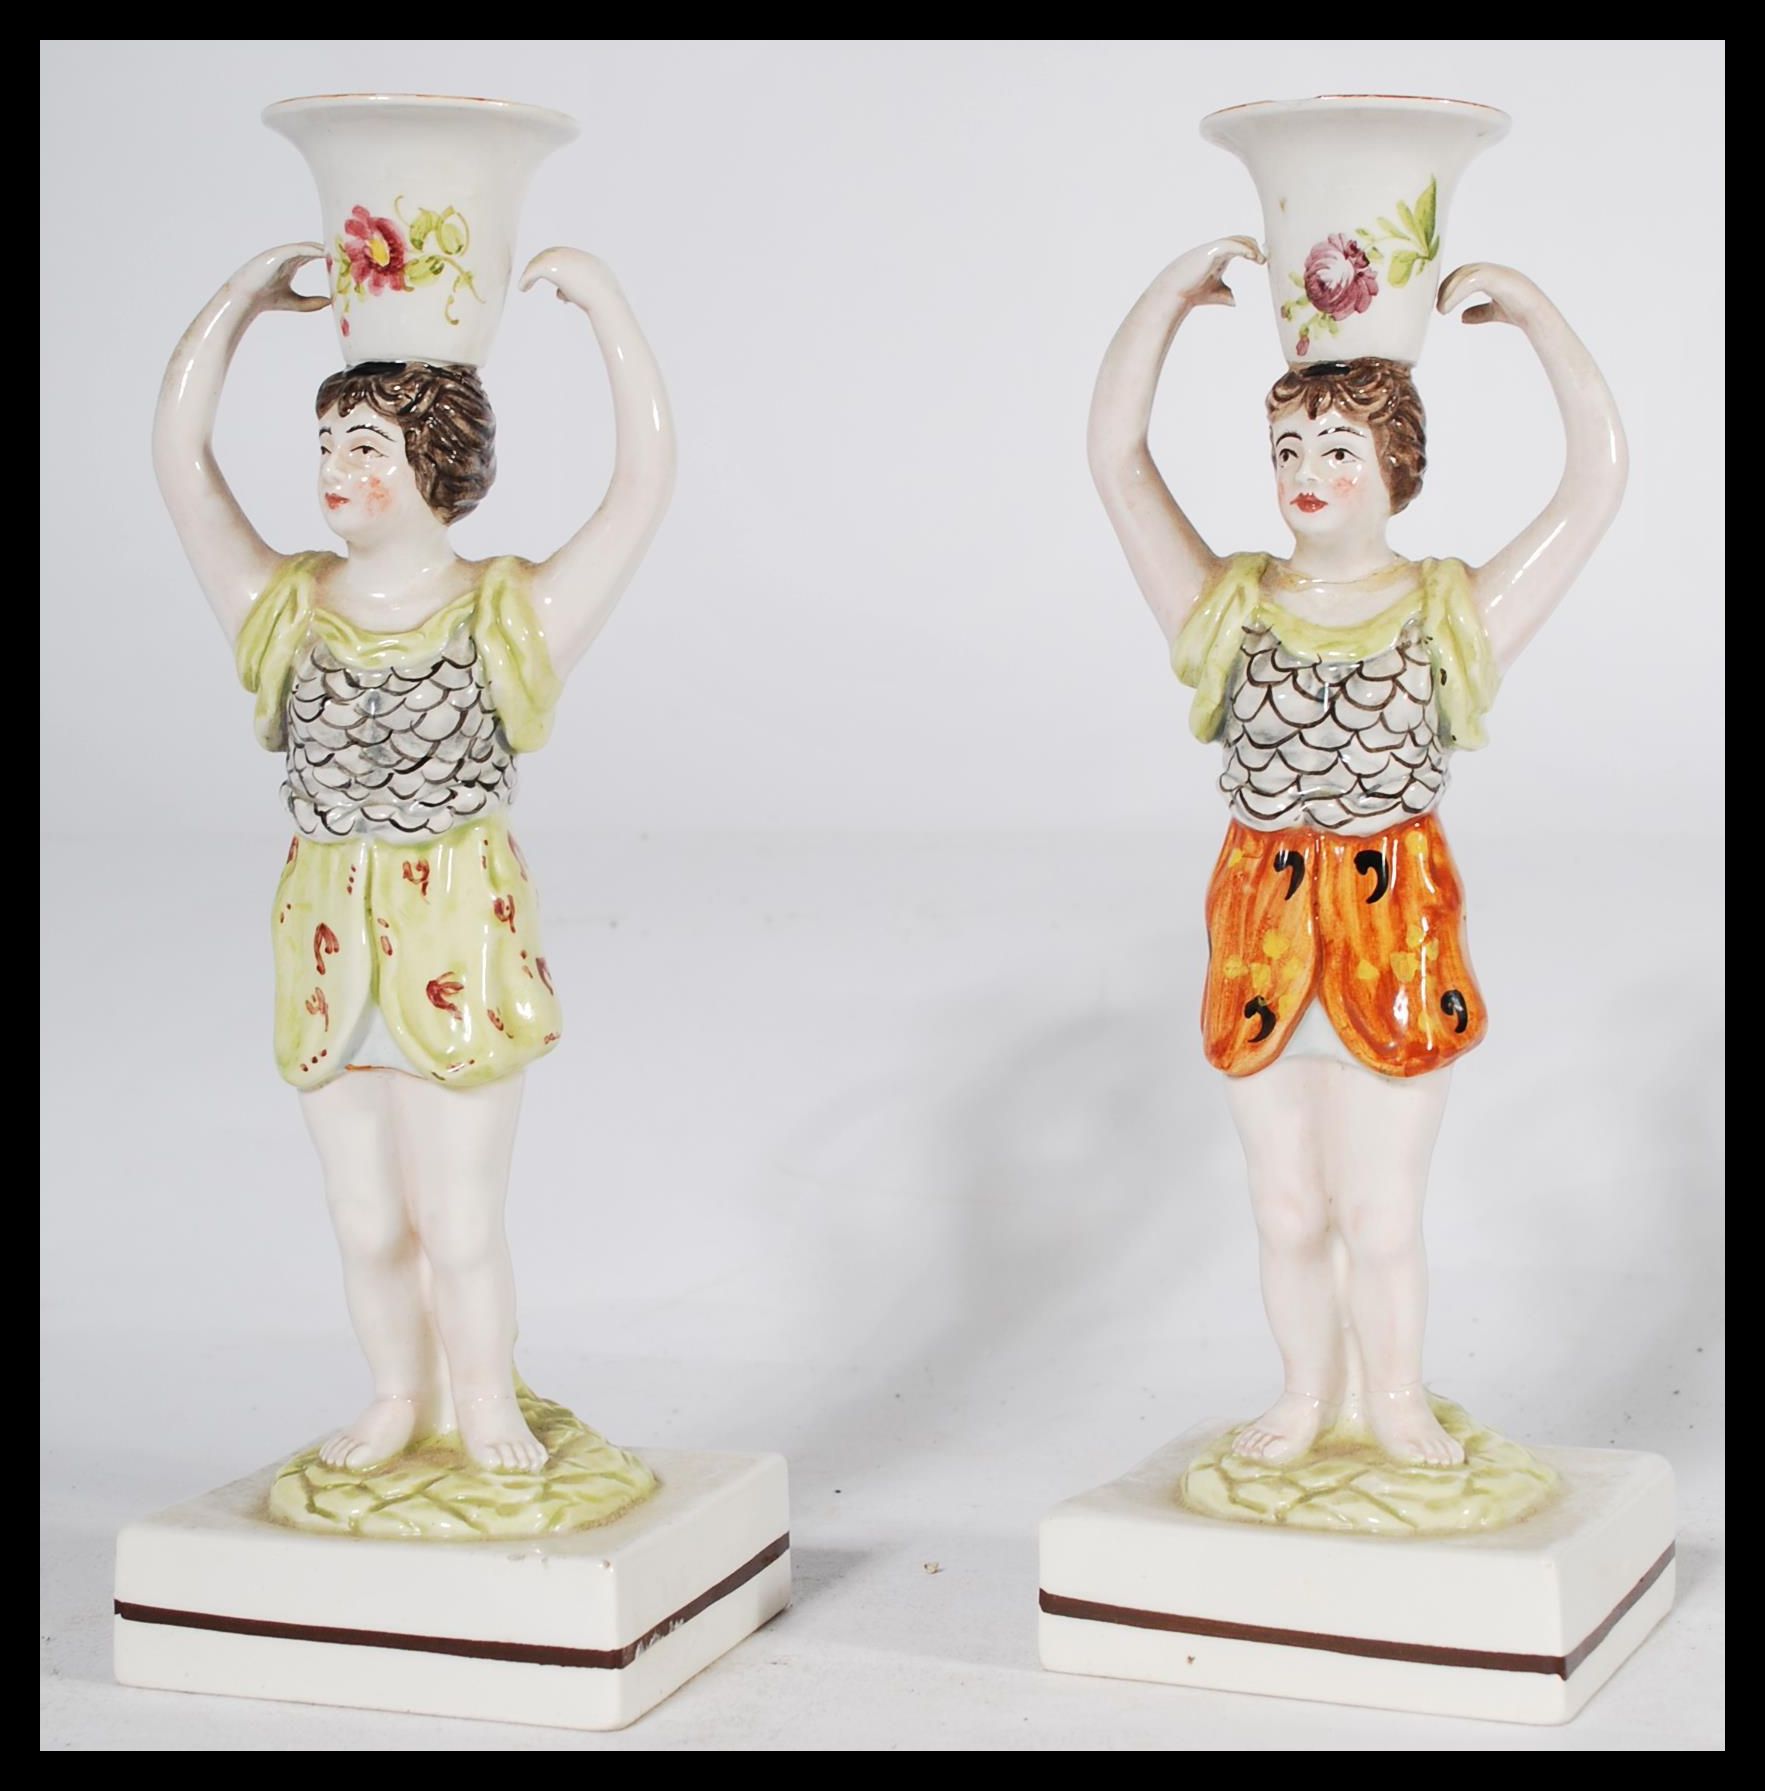 A pair of 19th century Staffordshire figural candlestick holders raised on square bases in the